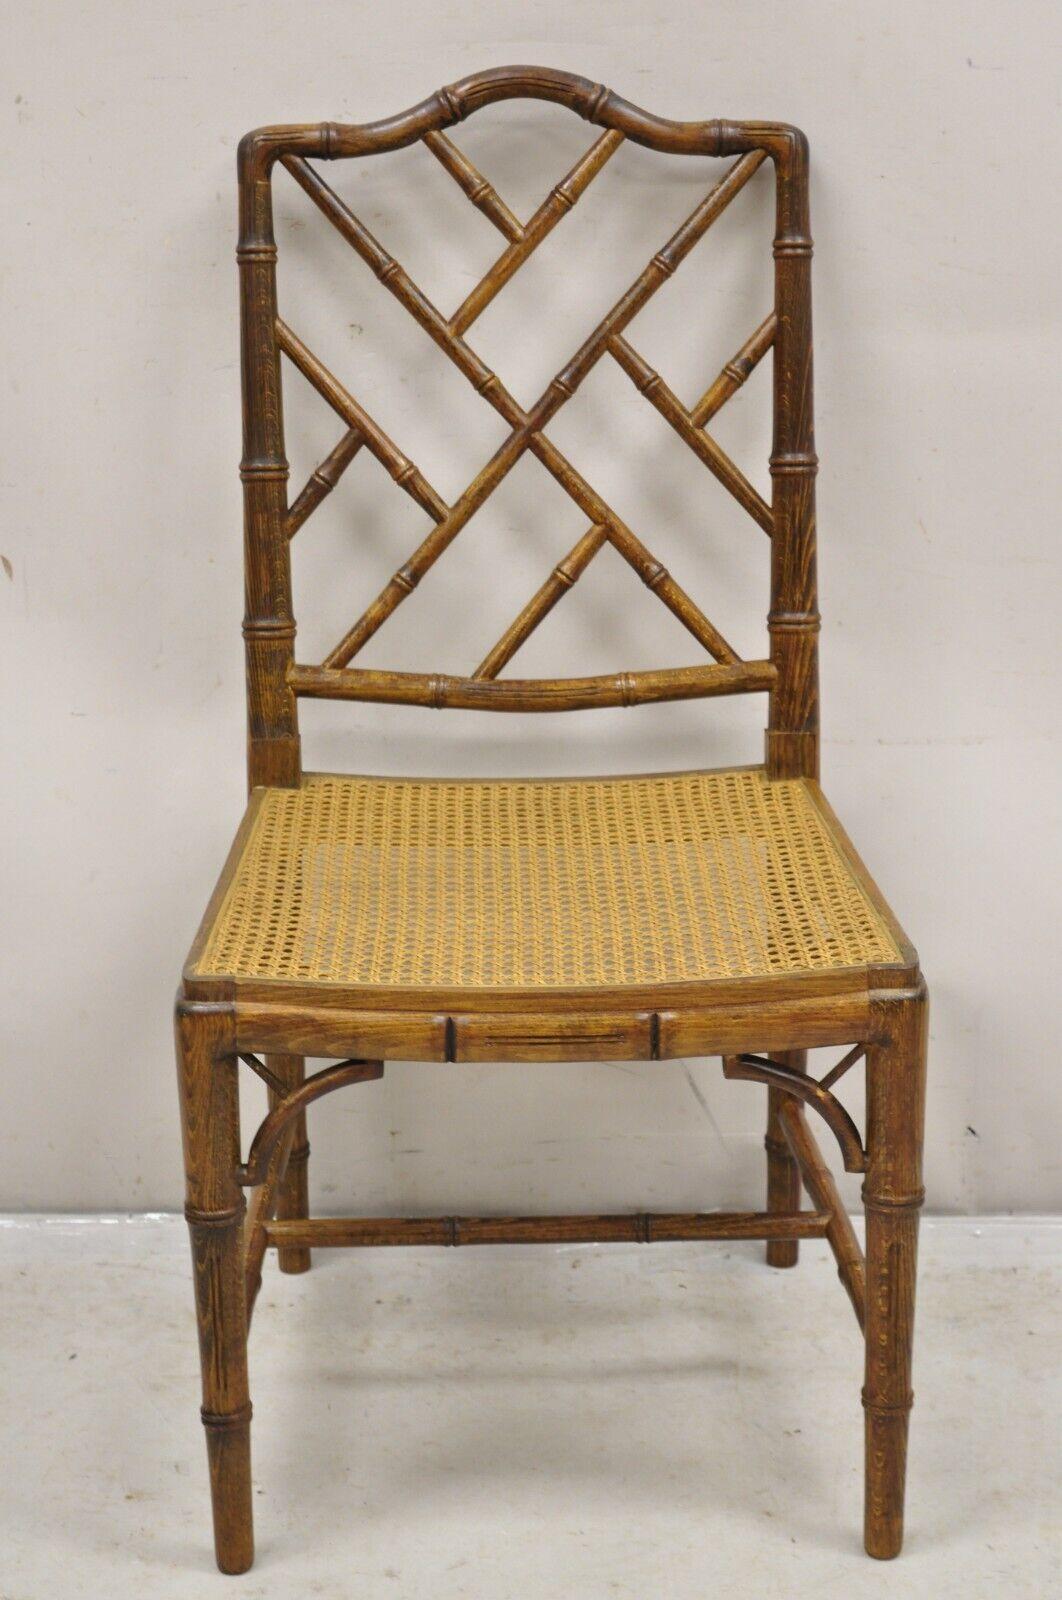 20th Century Chinese Chippendale Hollywood Regency Faux Bamboo Cane Dining Chairs - Set of 6 For Sale